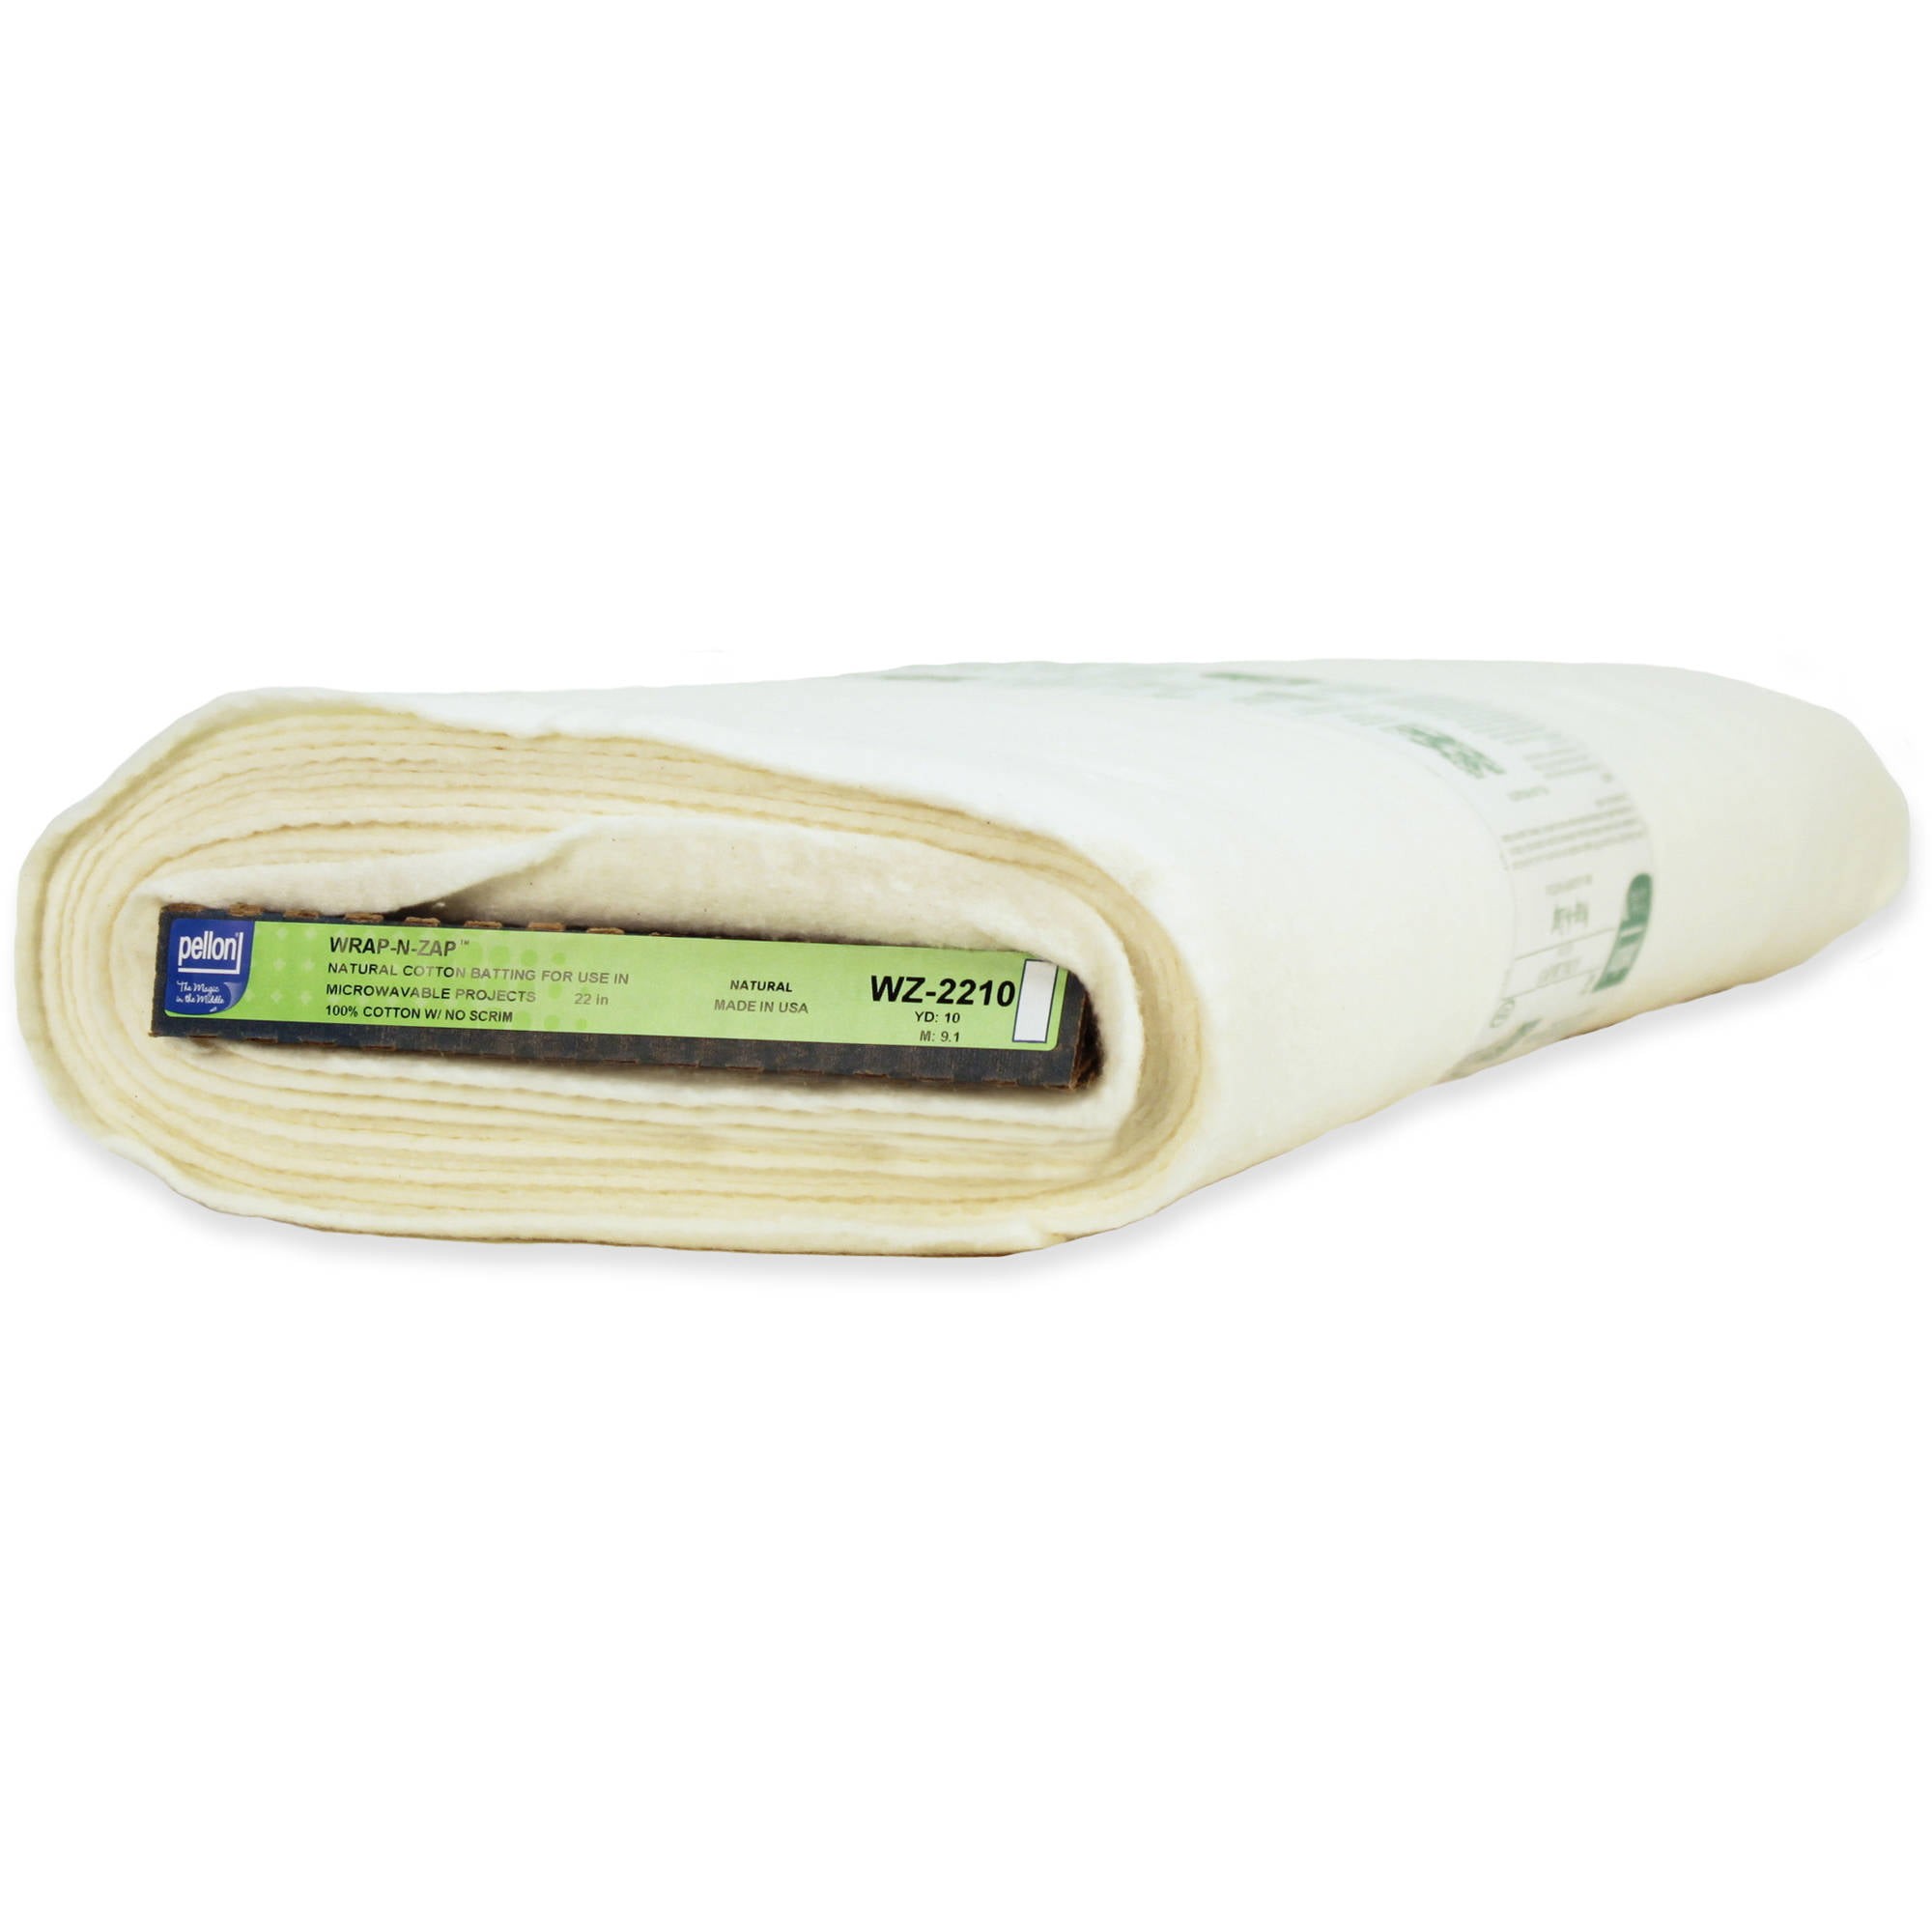 Pellon Polyester Quilting Batting, White 96 x 9 Yards by the Bolt -  Walmart.com